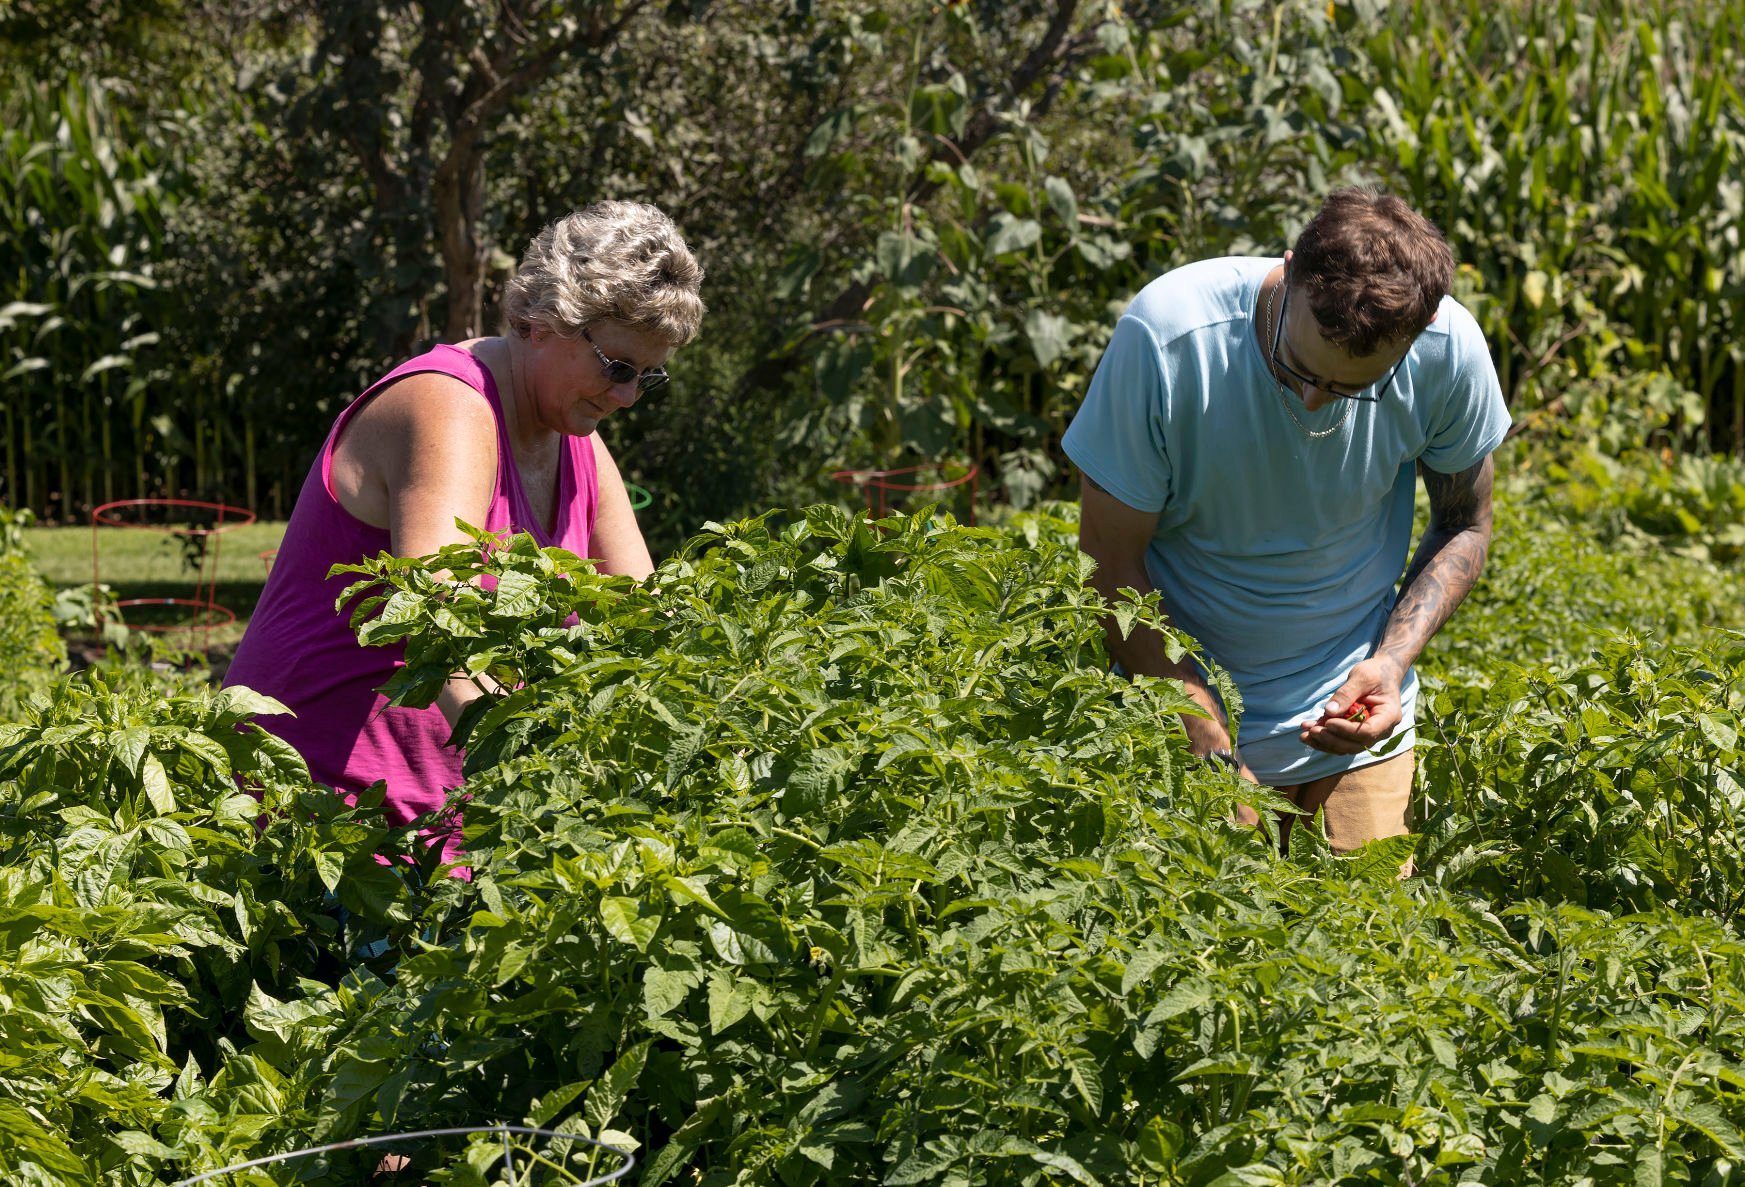 Mitch Allen and his mother, Martha Whitmer, pick peppers from their garden in Elizabeth, Ill. This is the second year they’ve been selling their products at the Galena (Ill.) Farmers Market. They grow a variety of produce, including hot peppers.    PHOTO CREDIT: Stephen Gassman